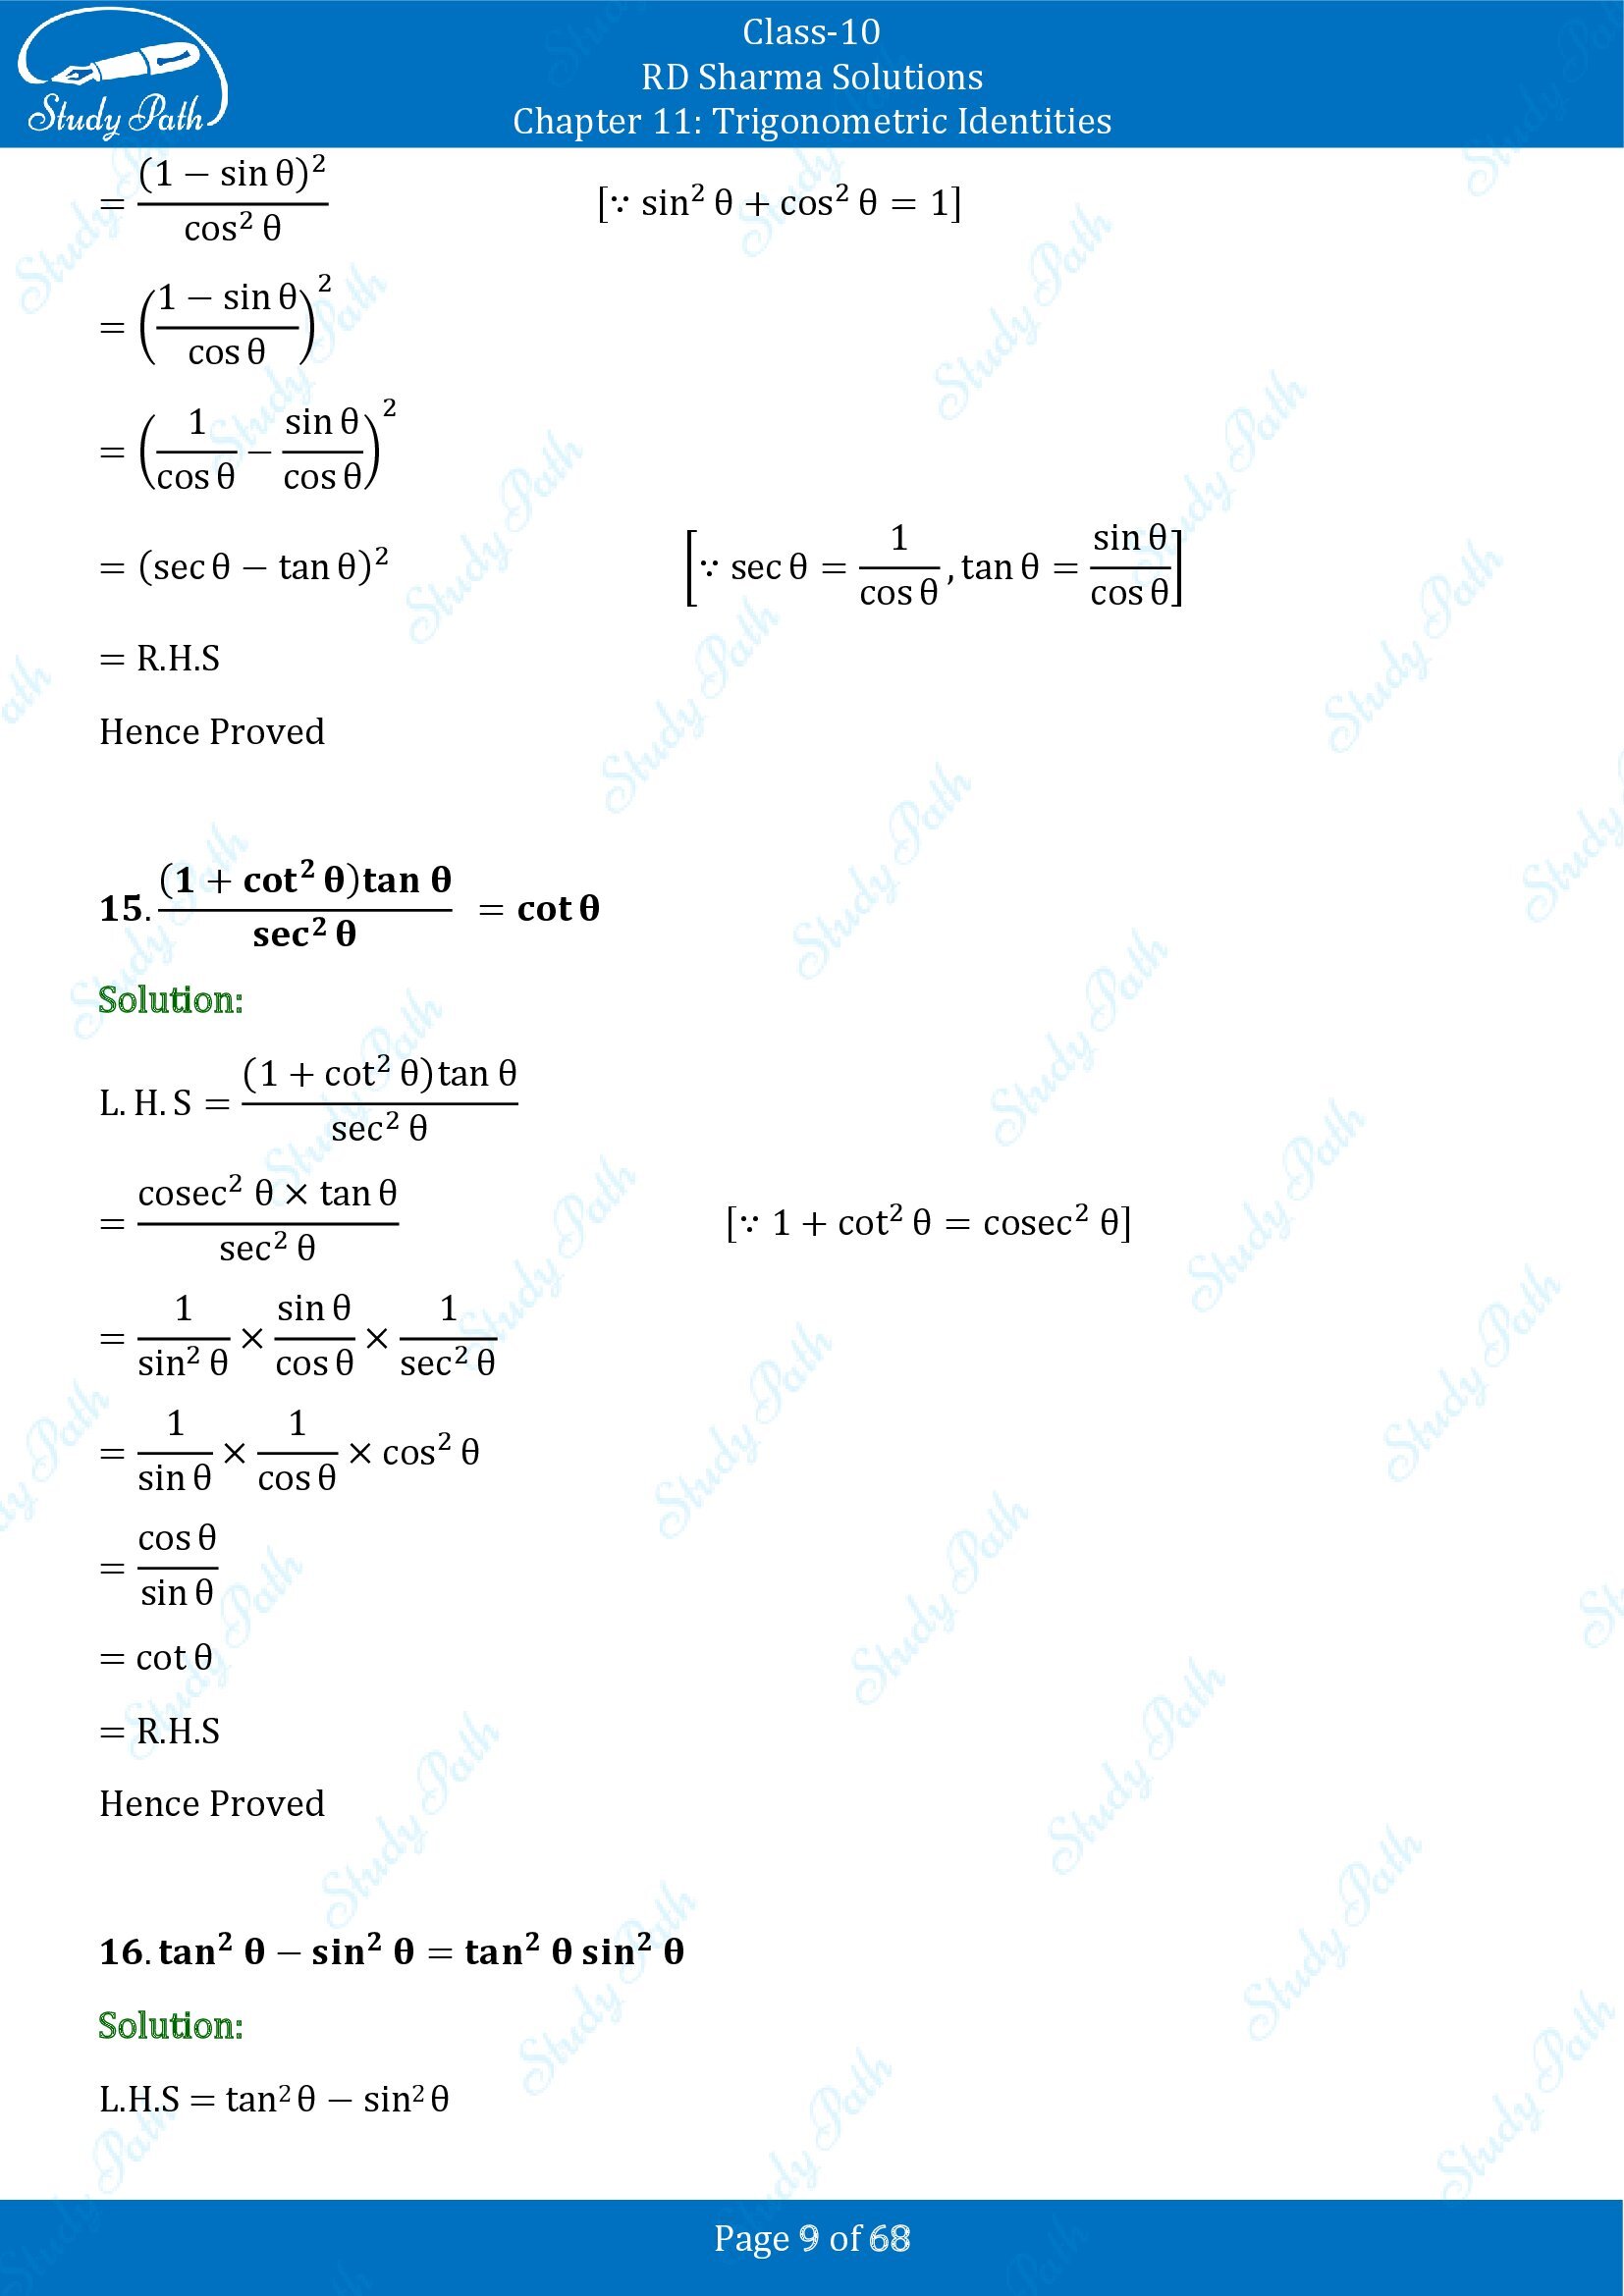 RD Sharma Solutions Class 10 Chapter 11 Trigonometric Identities Exercise 11.1 00009